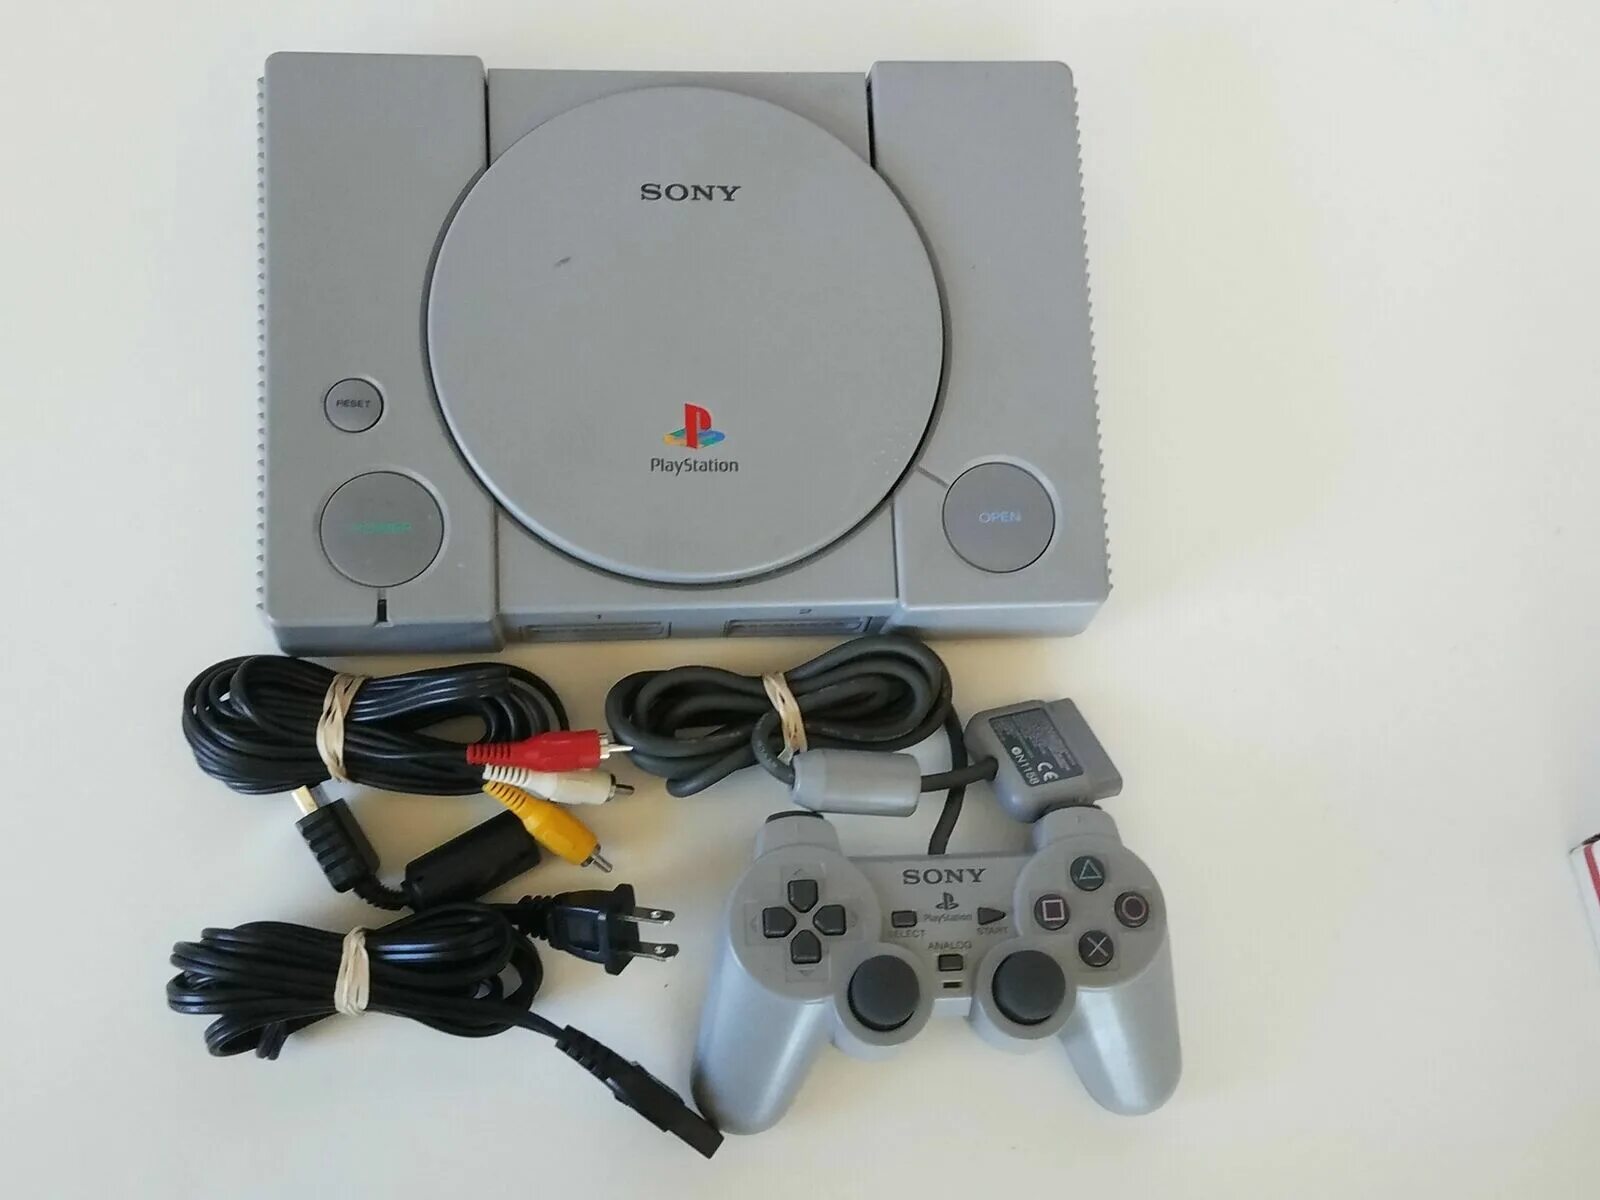 Playstation scph. Sony ps1 SCPH-1001. PS 1 SCPH 102. Ps1 SCPH 1000 Full Set. Sony ps1 SCPH-3001.